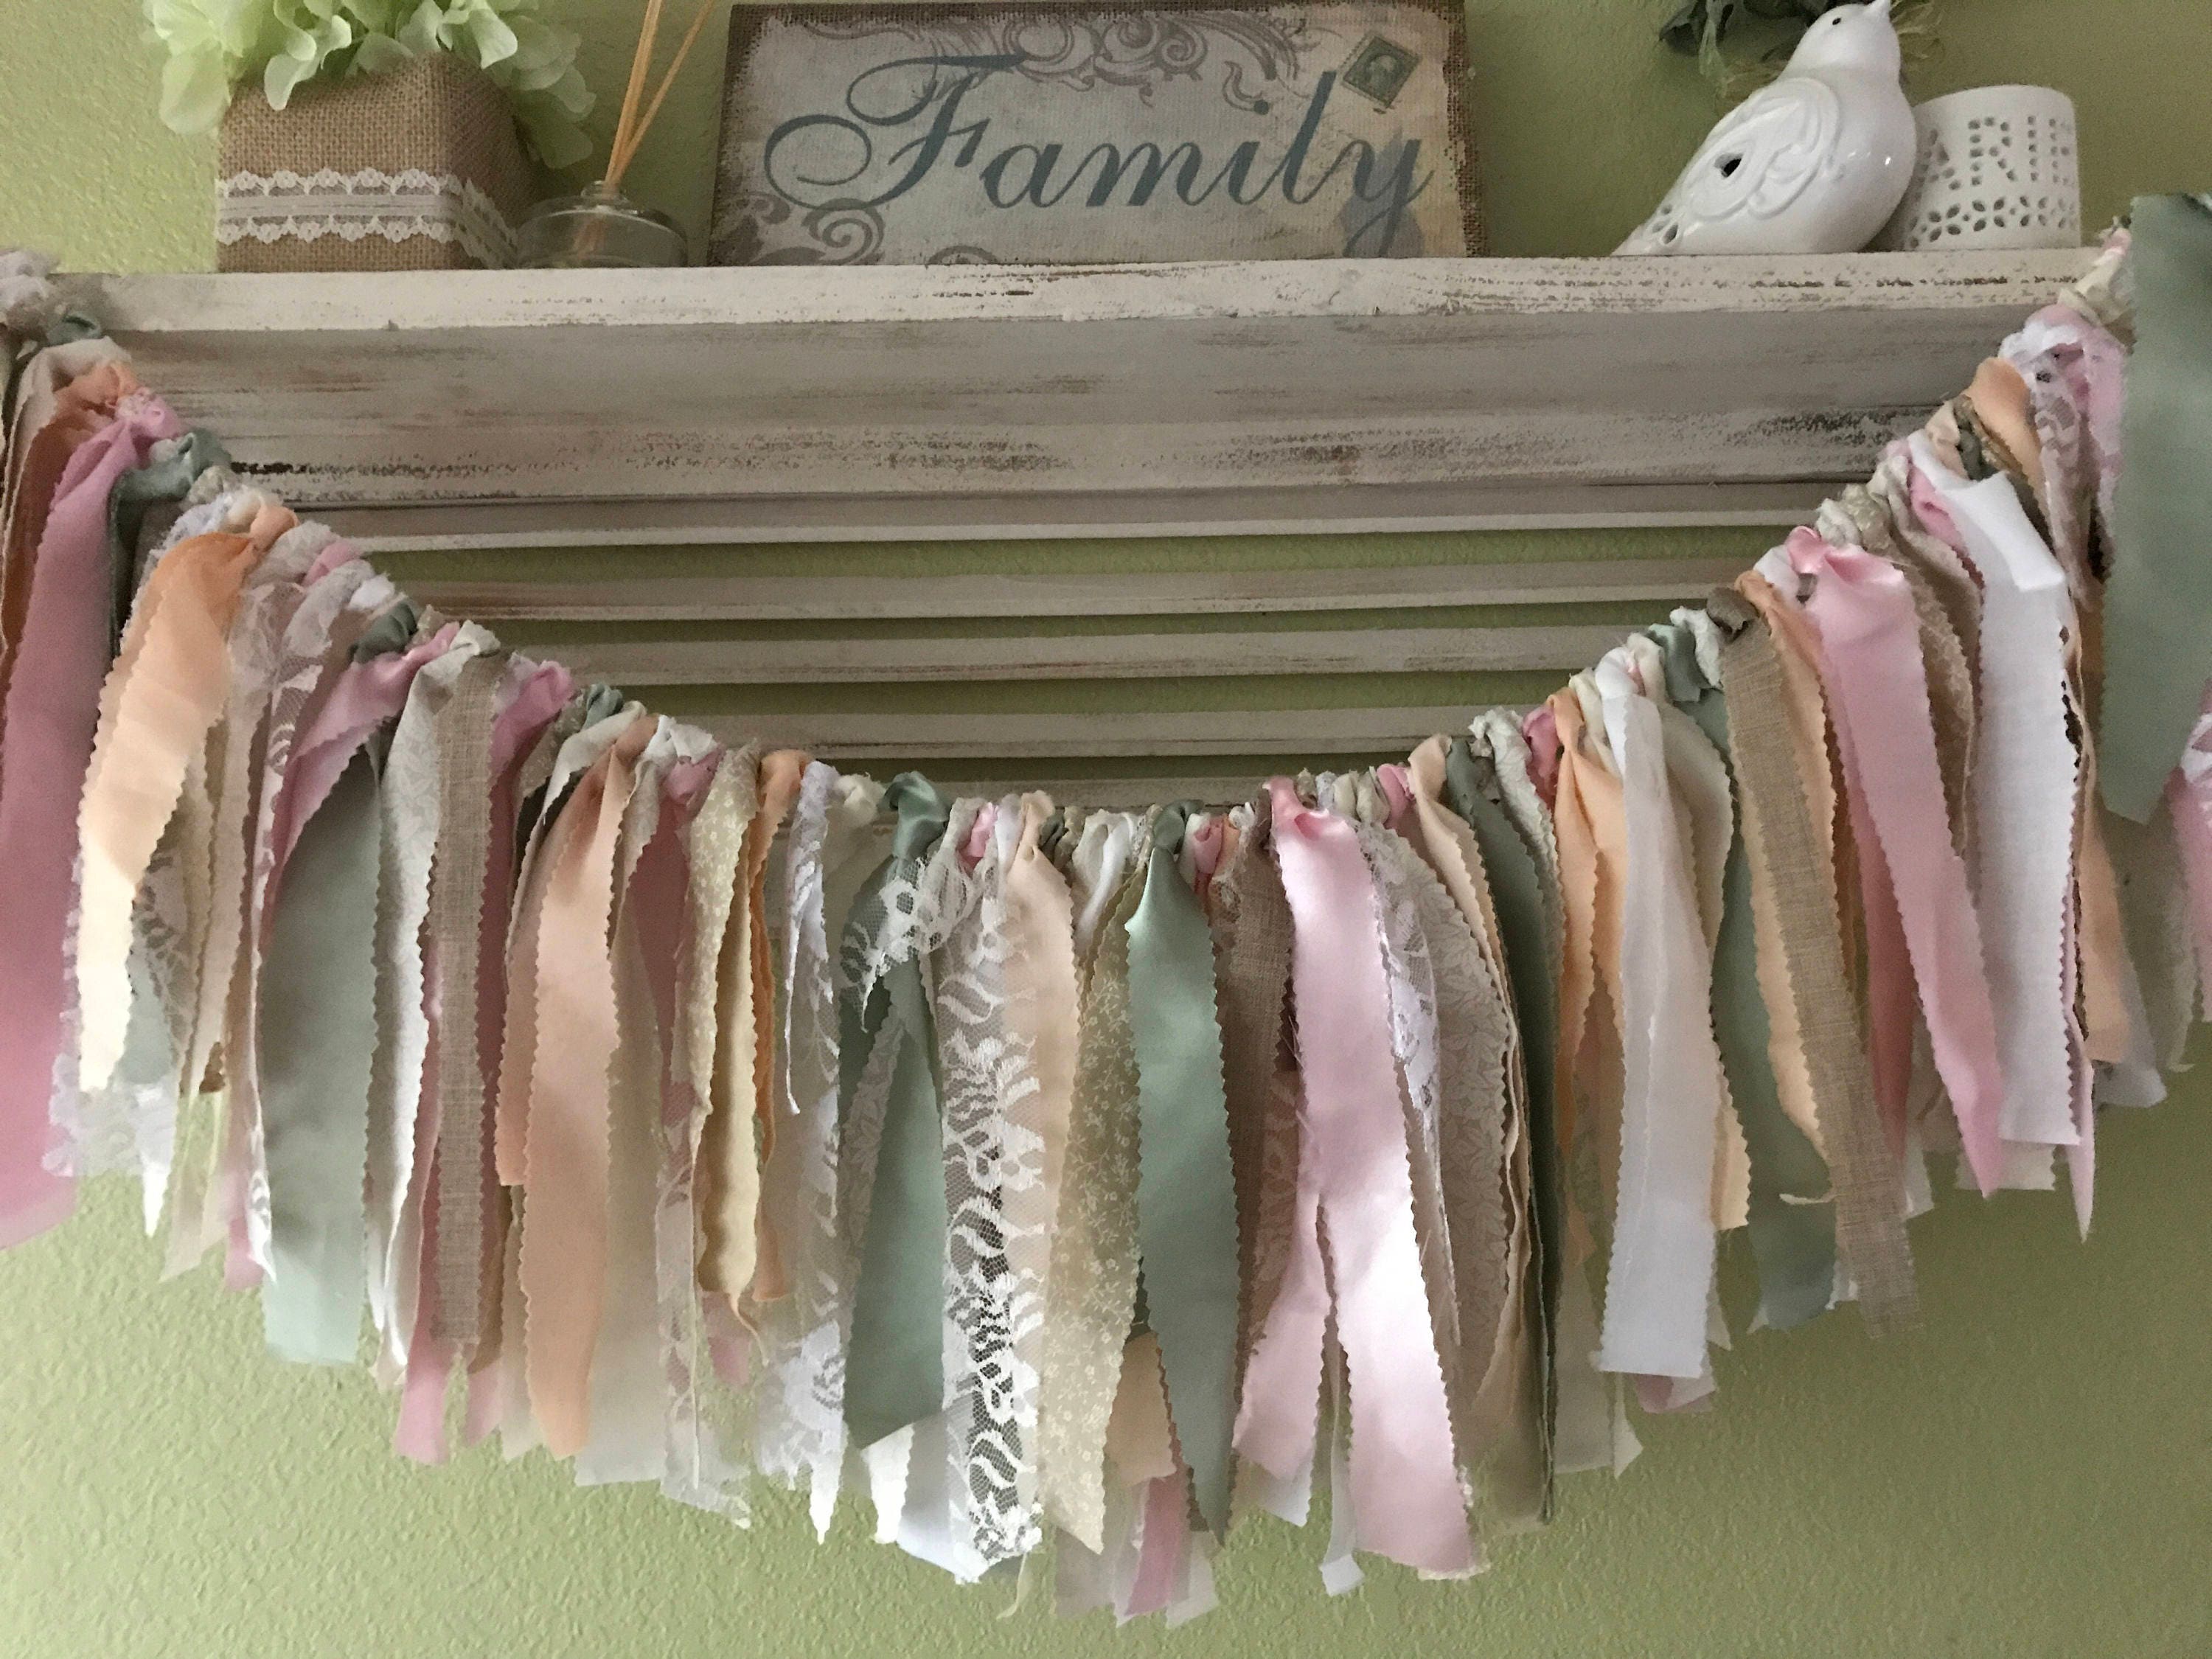 Shabby Chic Princess Baby Shower Decorations for a Girl – Sunshine Parties